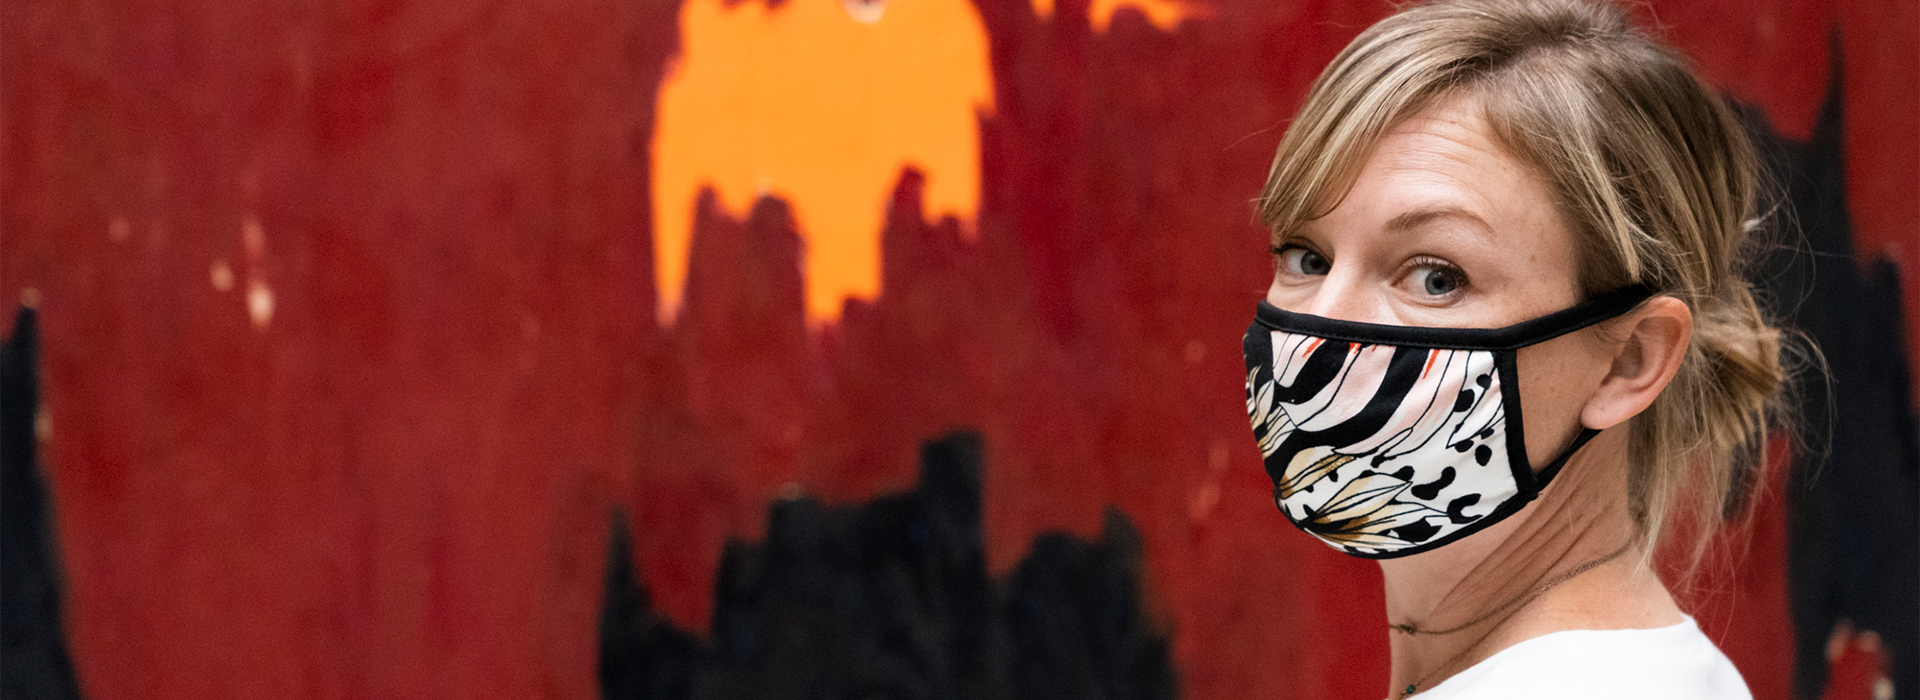 Woman wearing a face mask with a pattern looks at the camera with a red Clyfford Still painting in the background